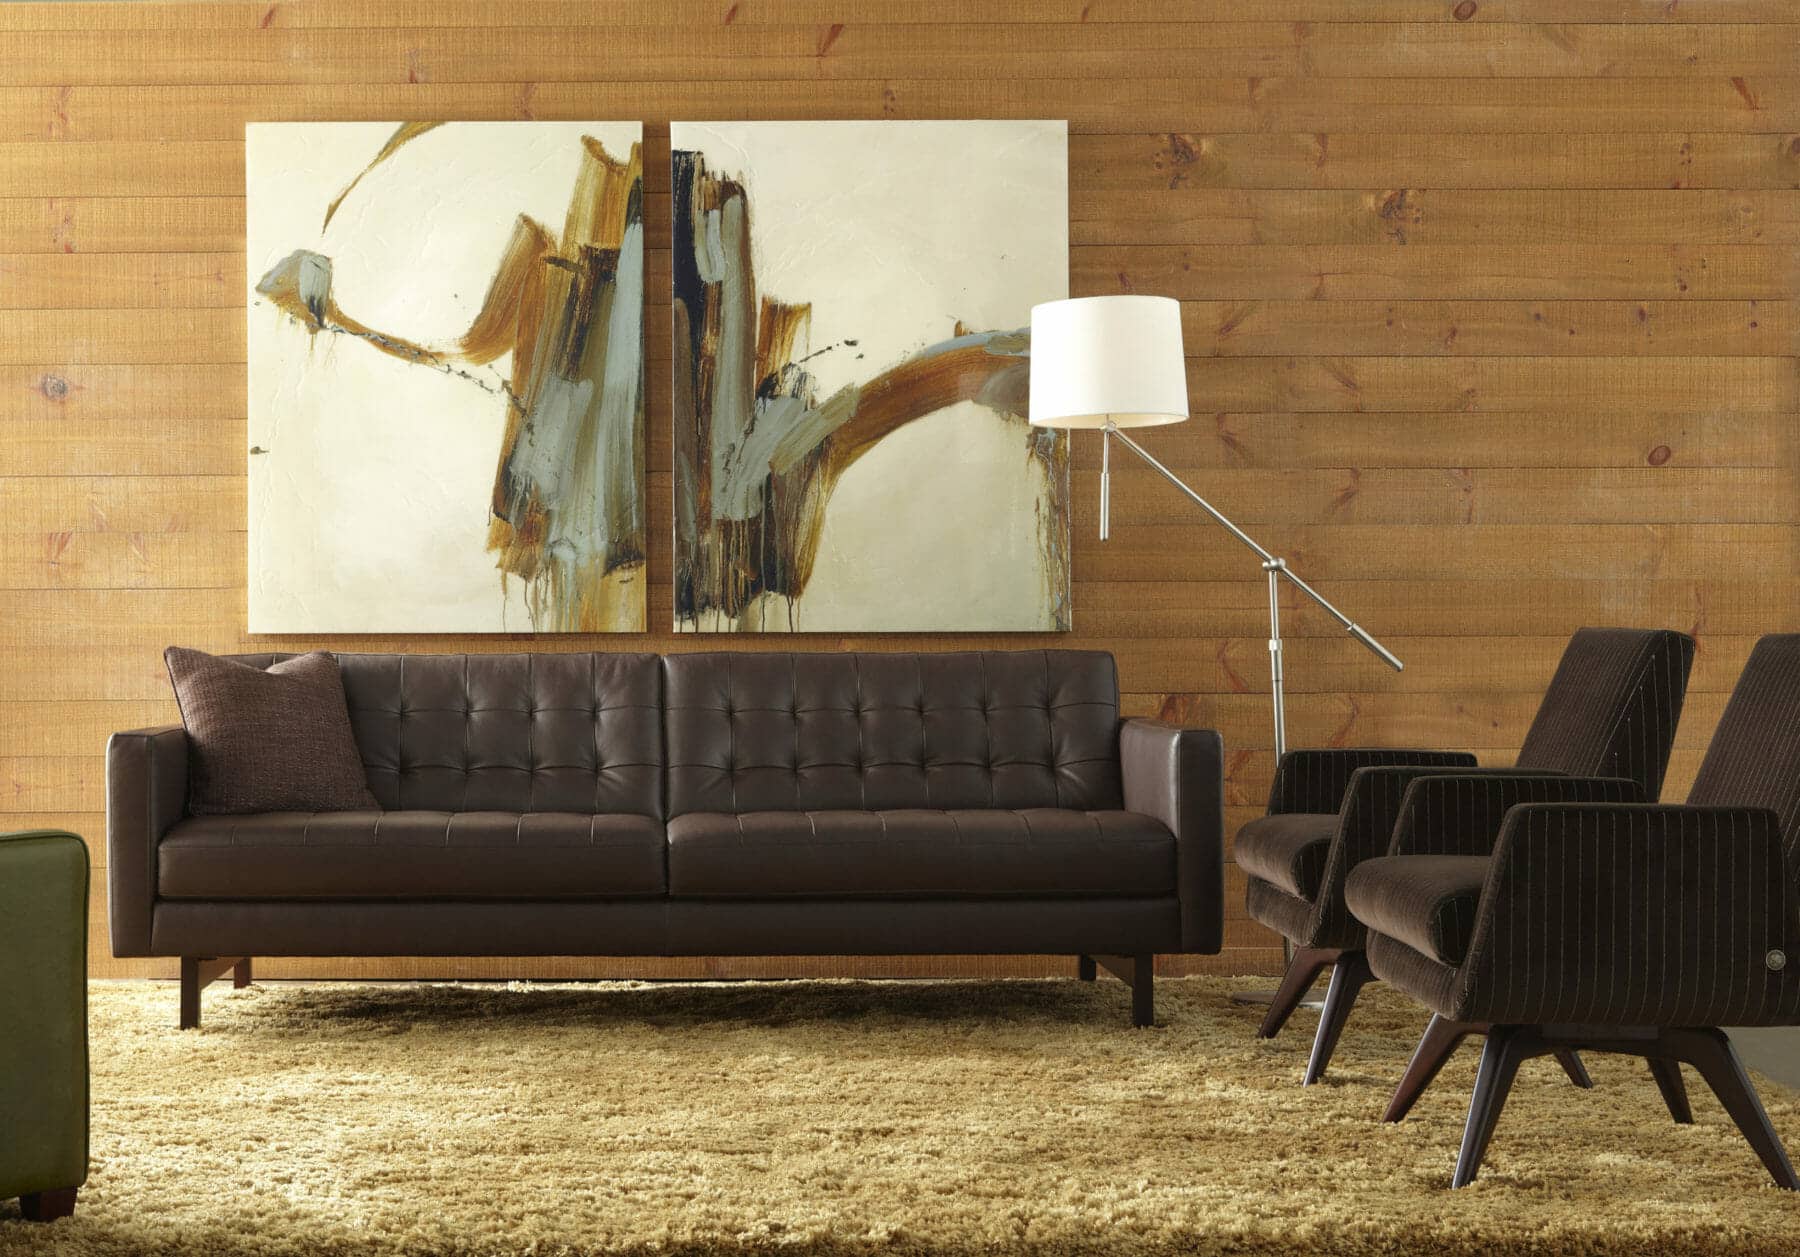 american leather parker sofa with chaise